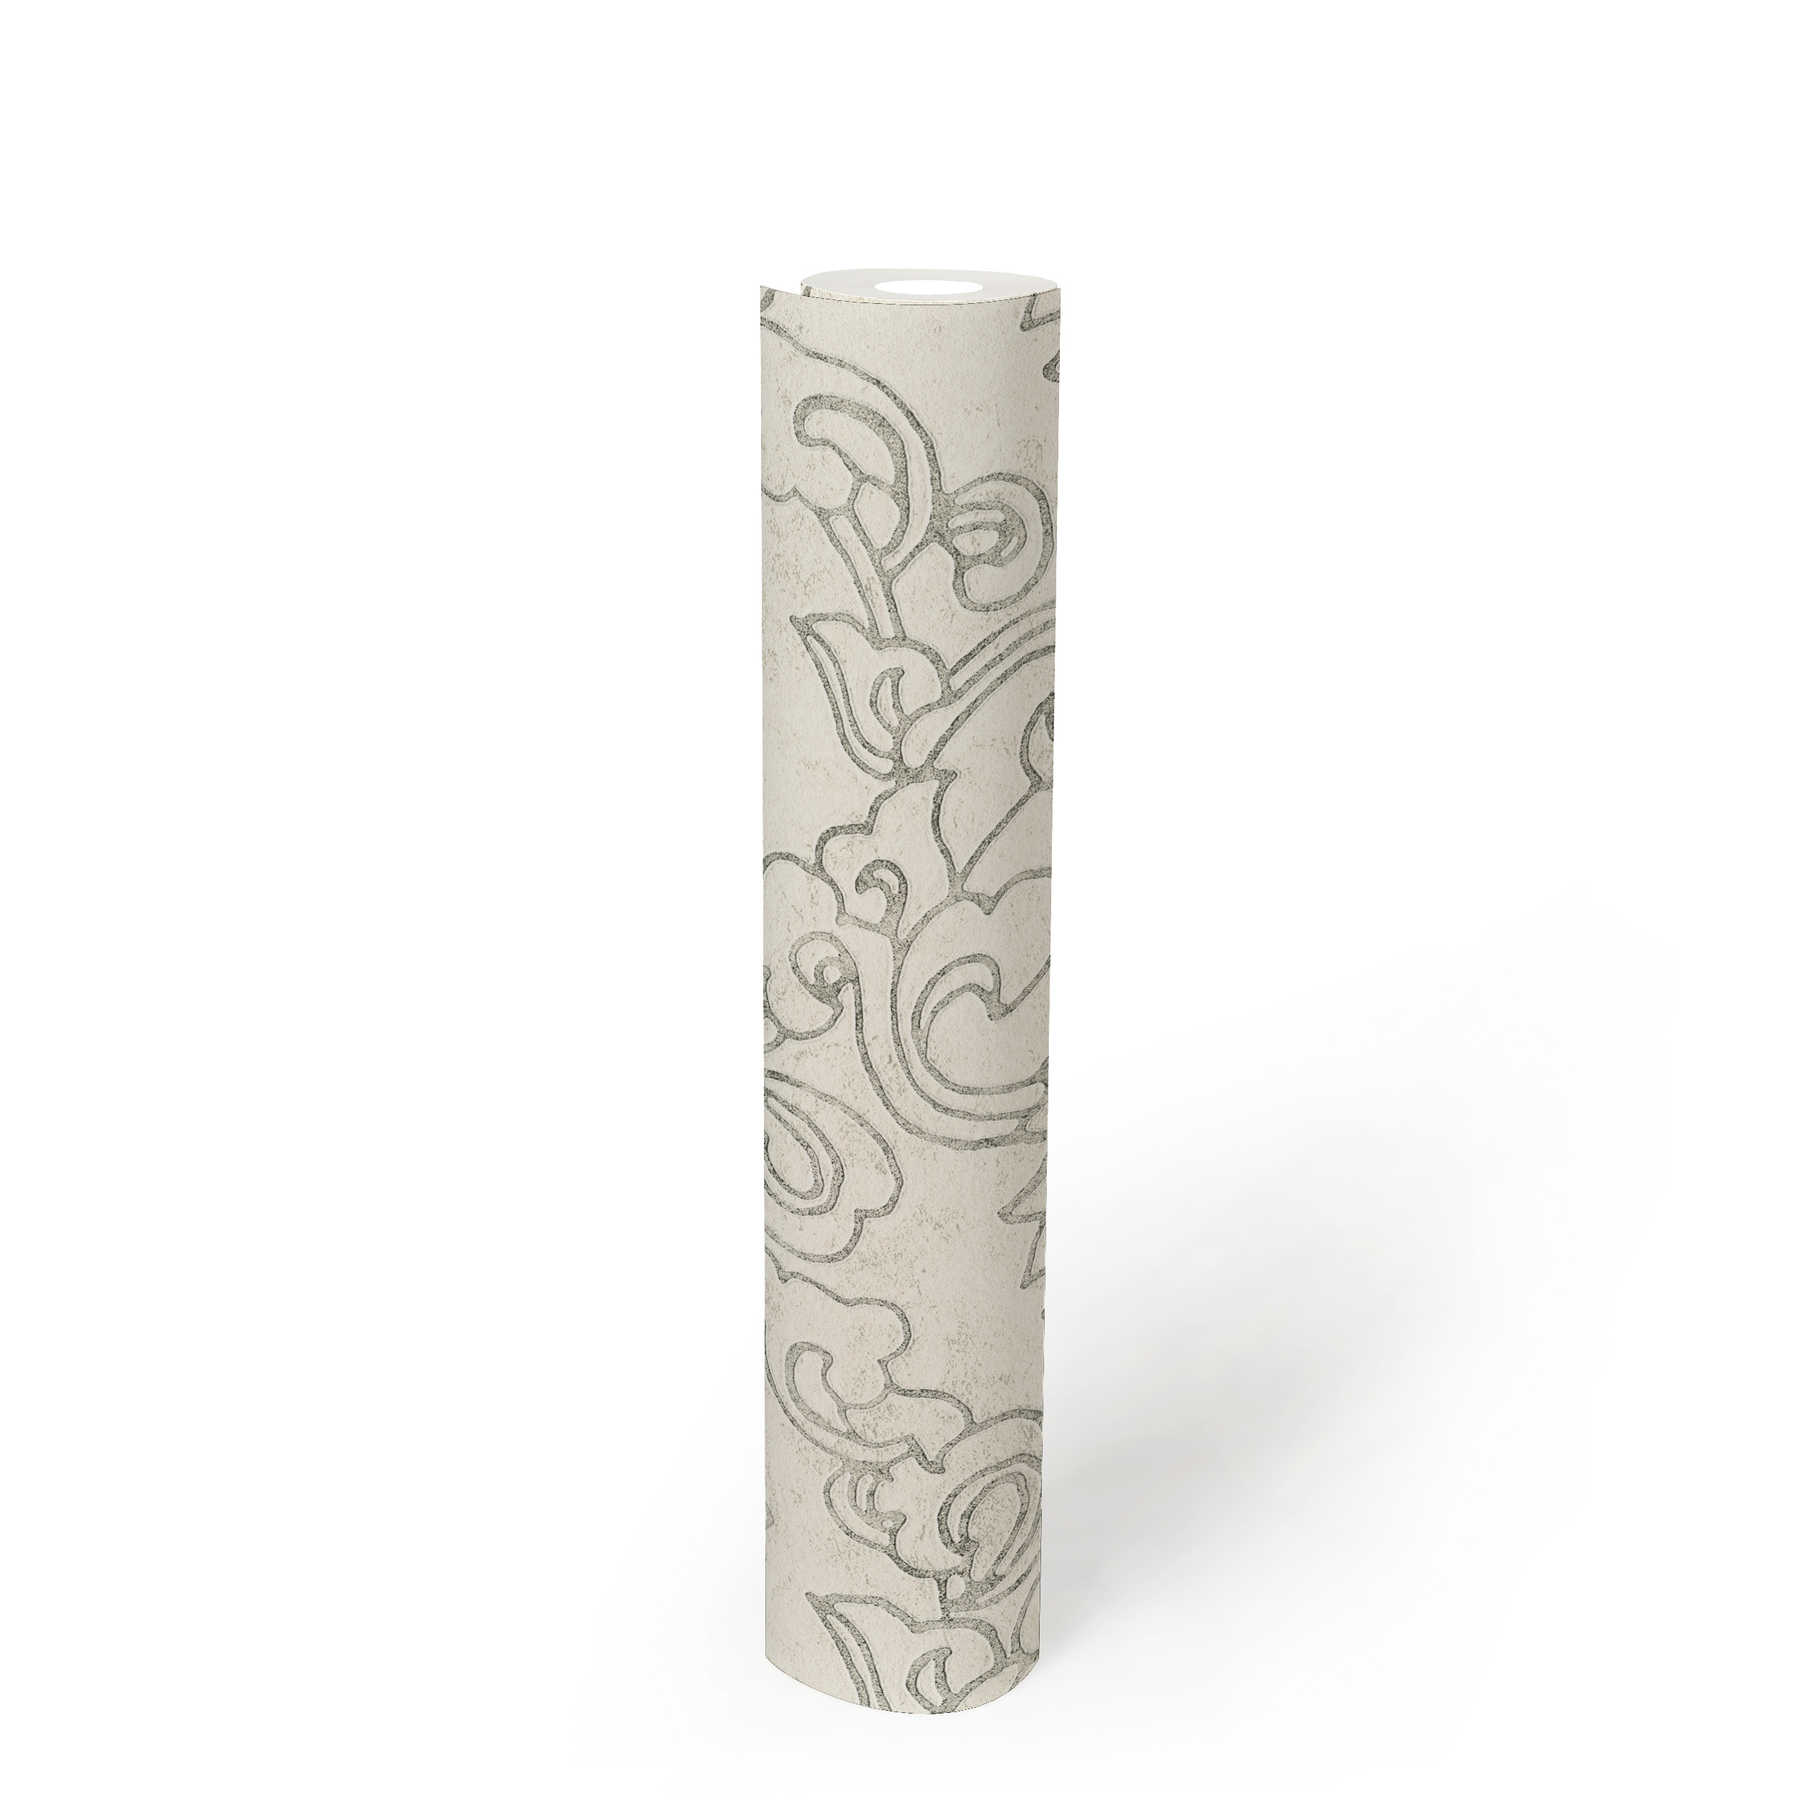             Floral ornament wallpaper in Asian style with gold accents - white, silver, grey
        